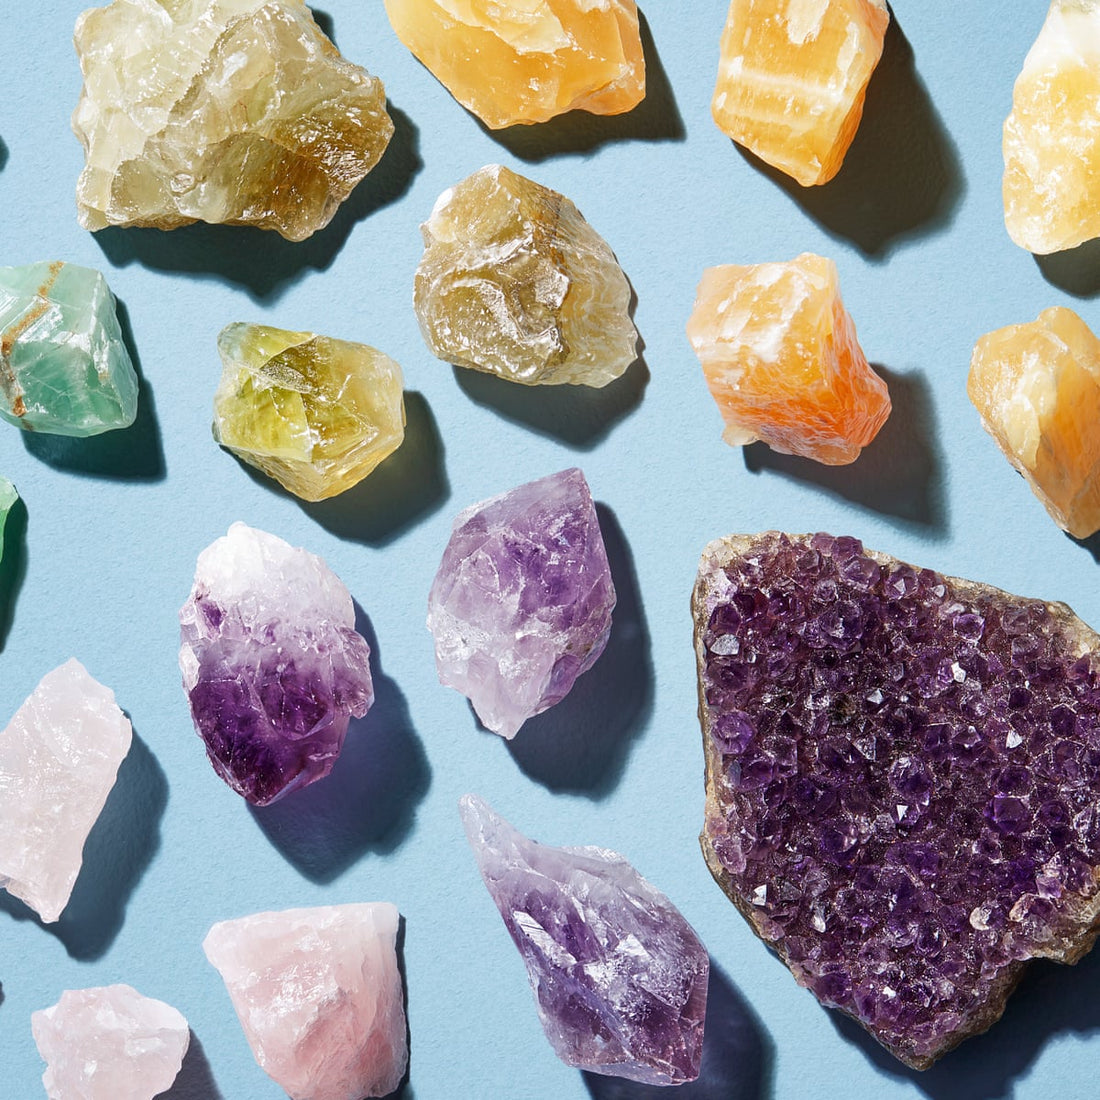 Can I Charge My Crystals In The Sun?